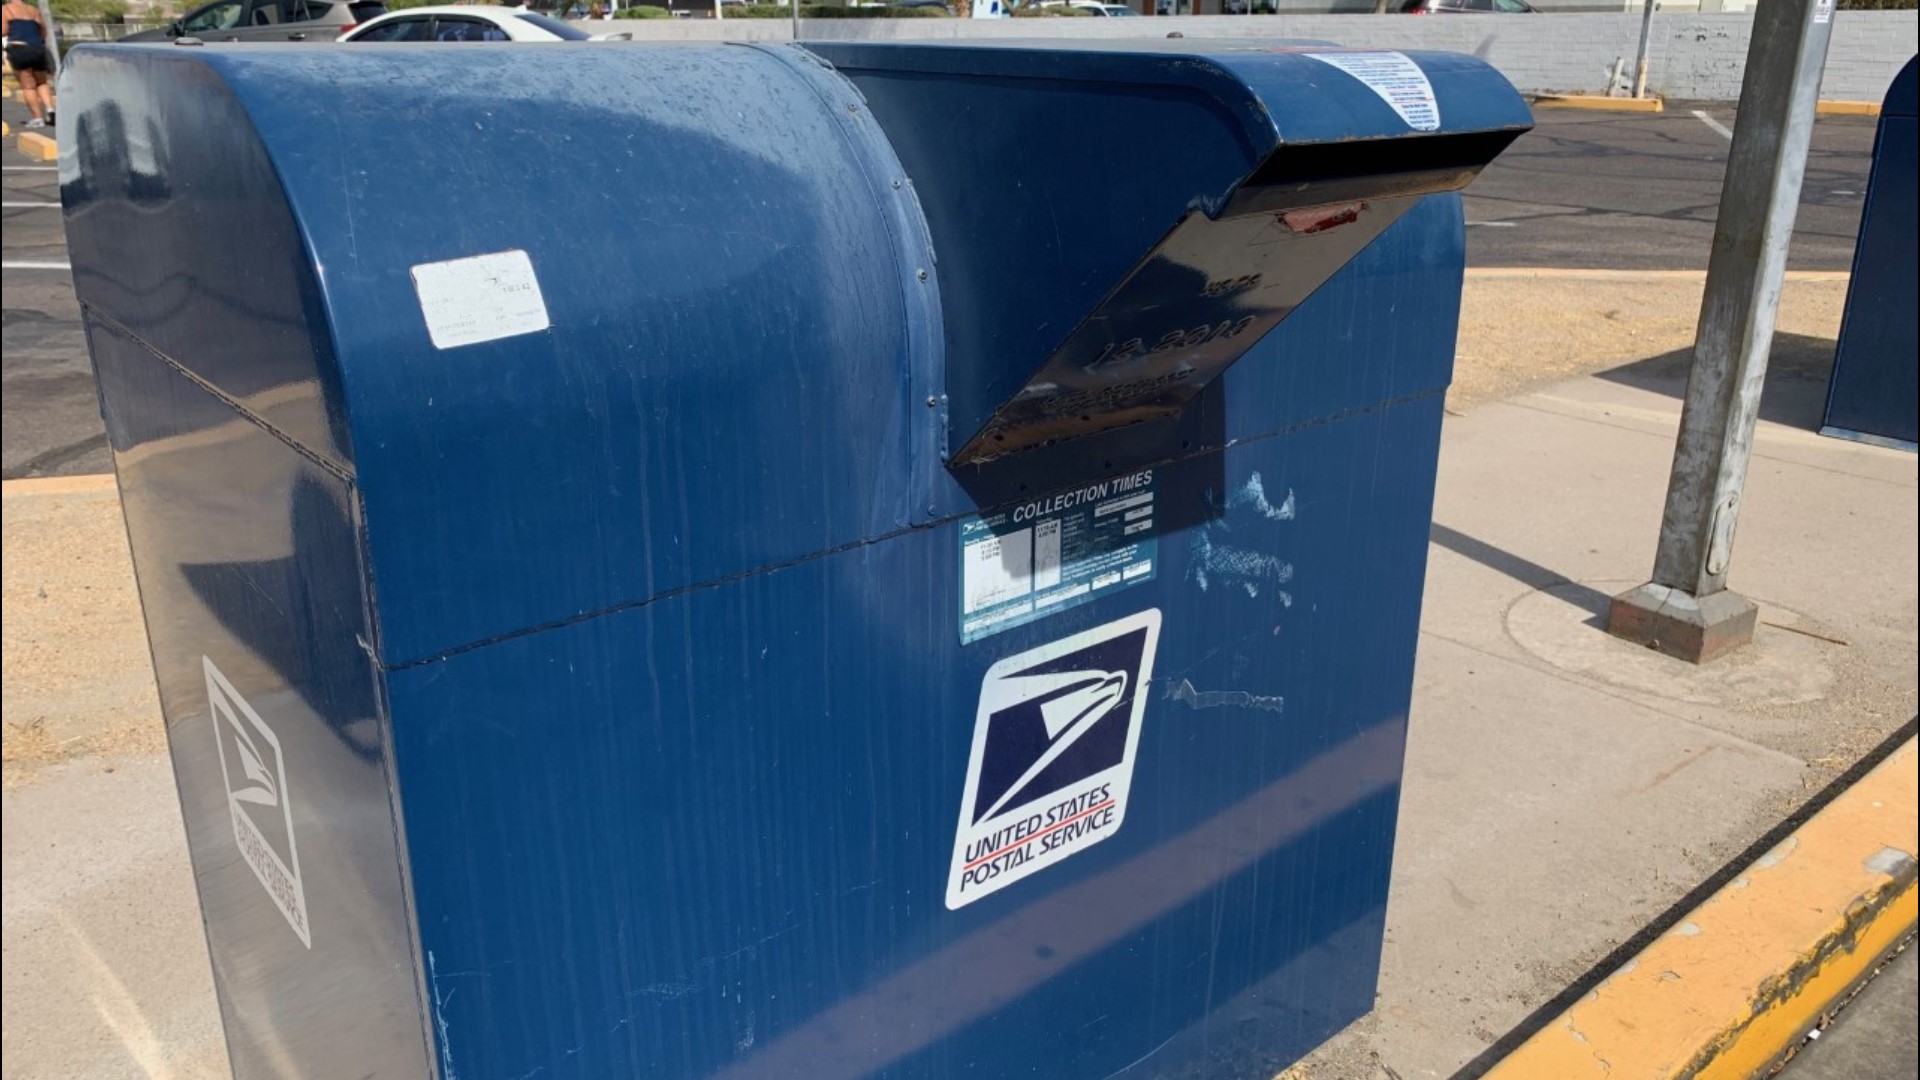 Some people in the Valley say they've experienced delays in receiving mail, medications and even ballots. 12 News' William Pitts puts the postal service to the test.